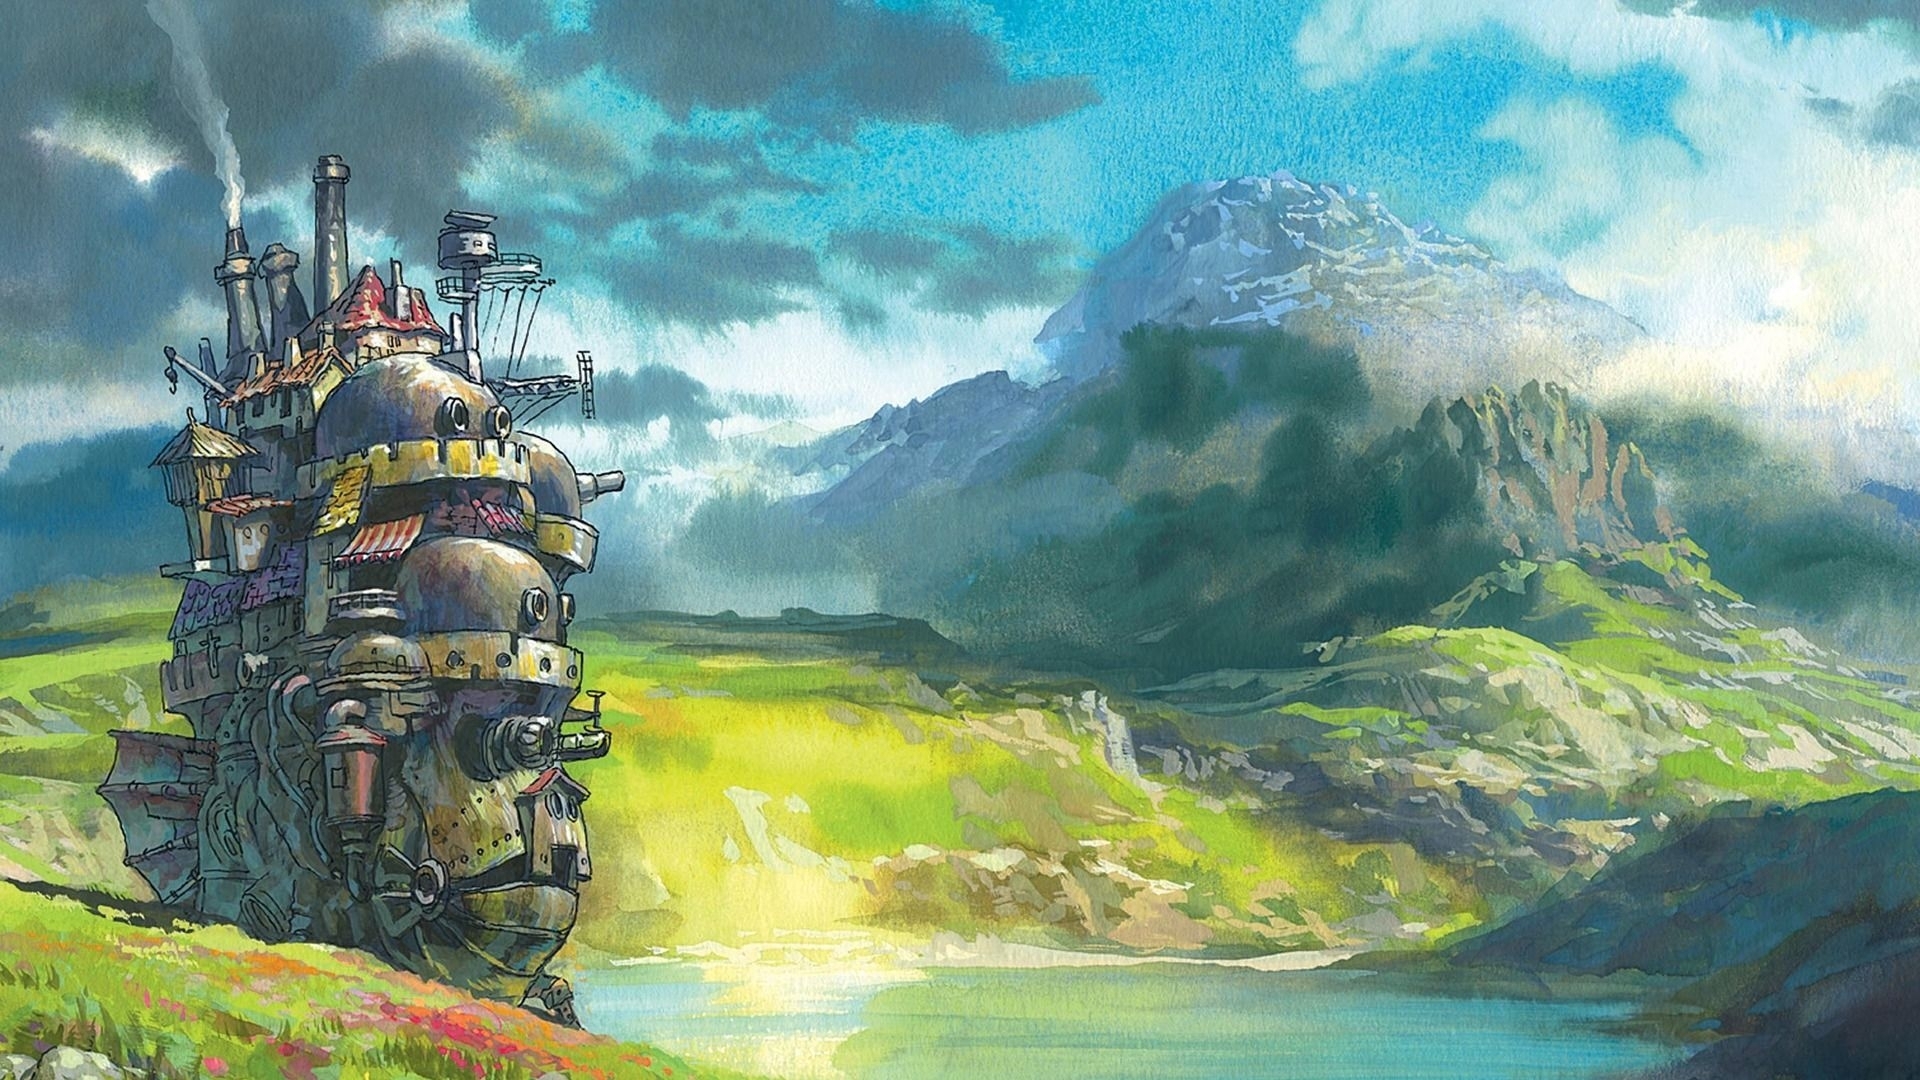 10 New Studio Ghibli Hd Wallpapers FULL HD 1080p For PC Background